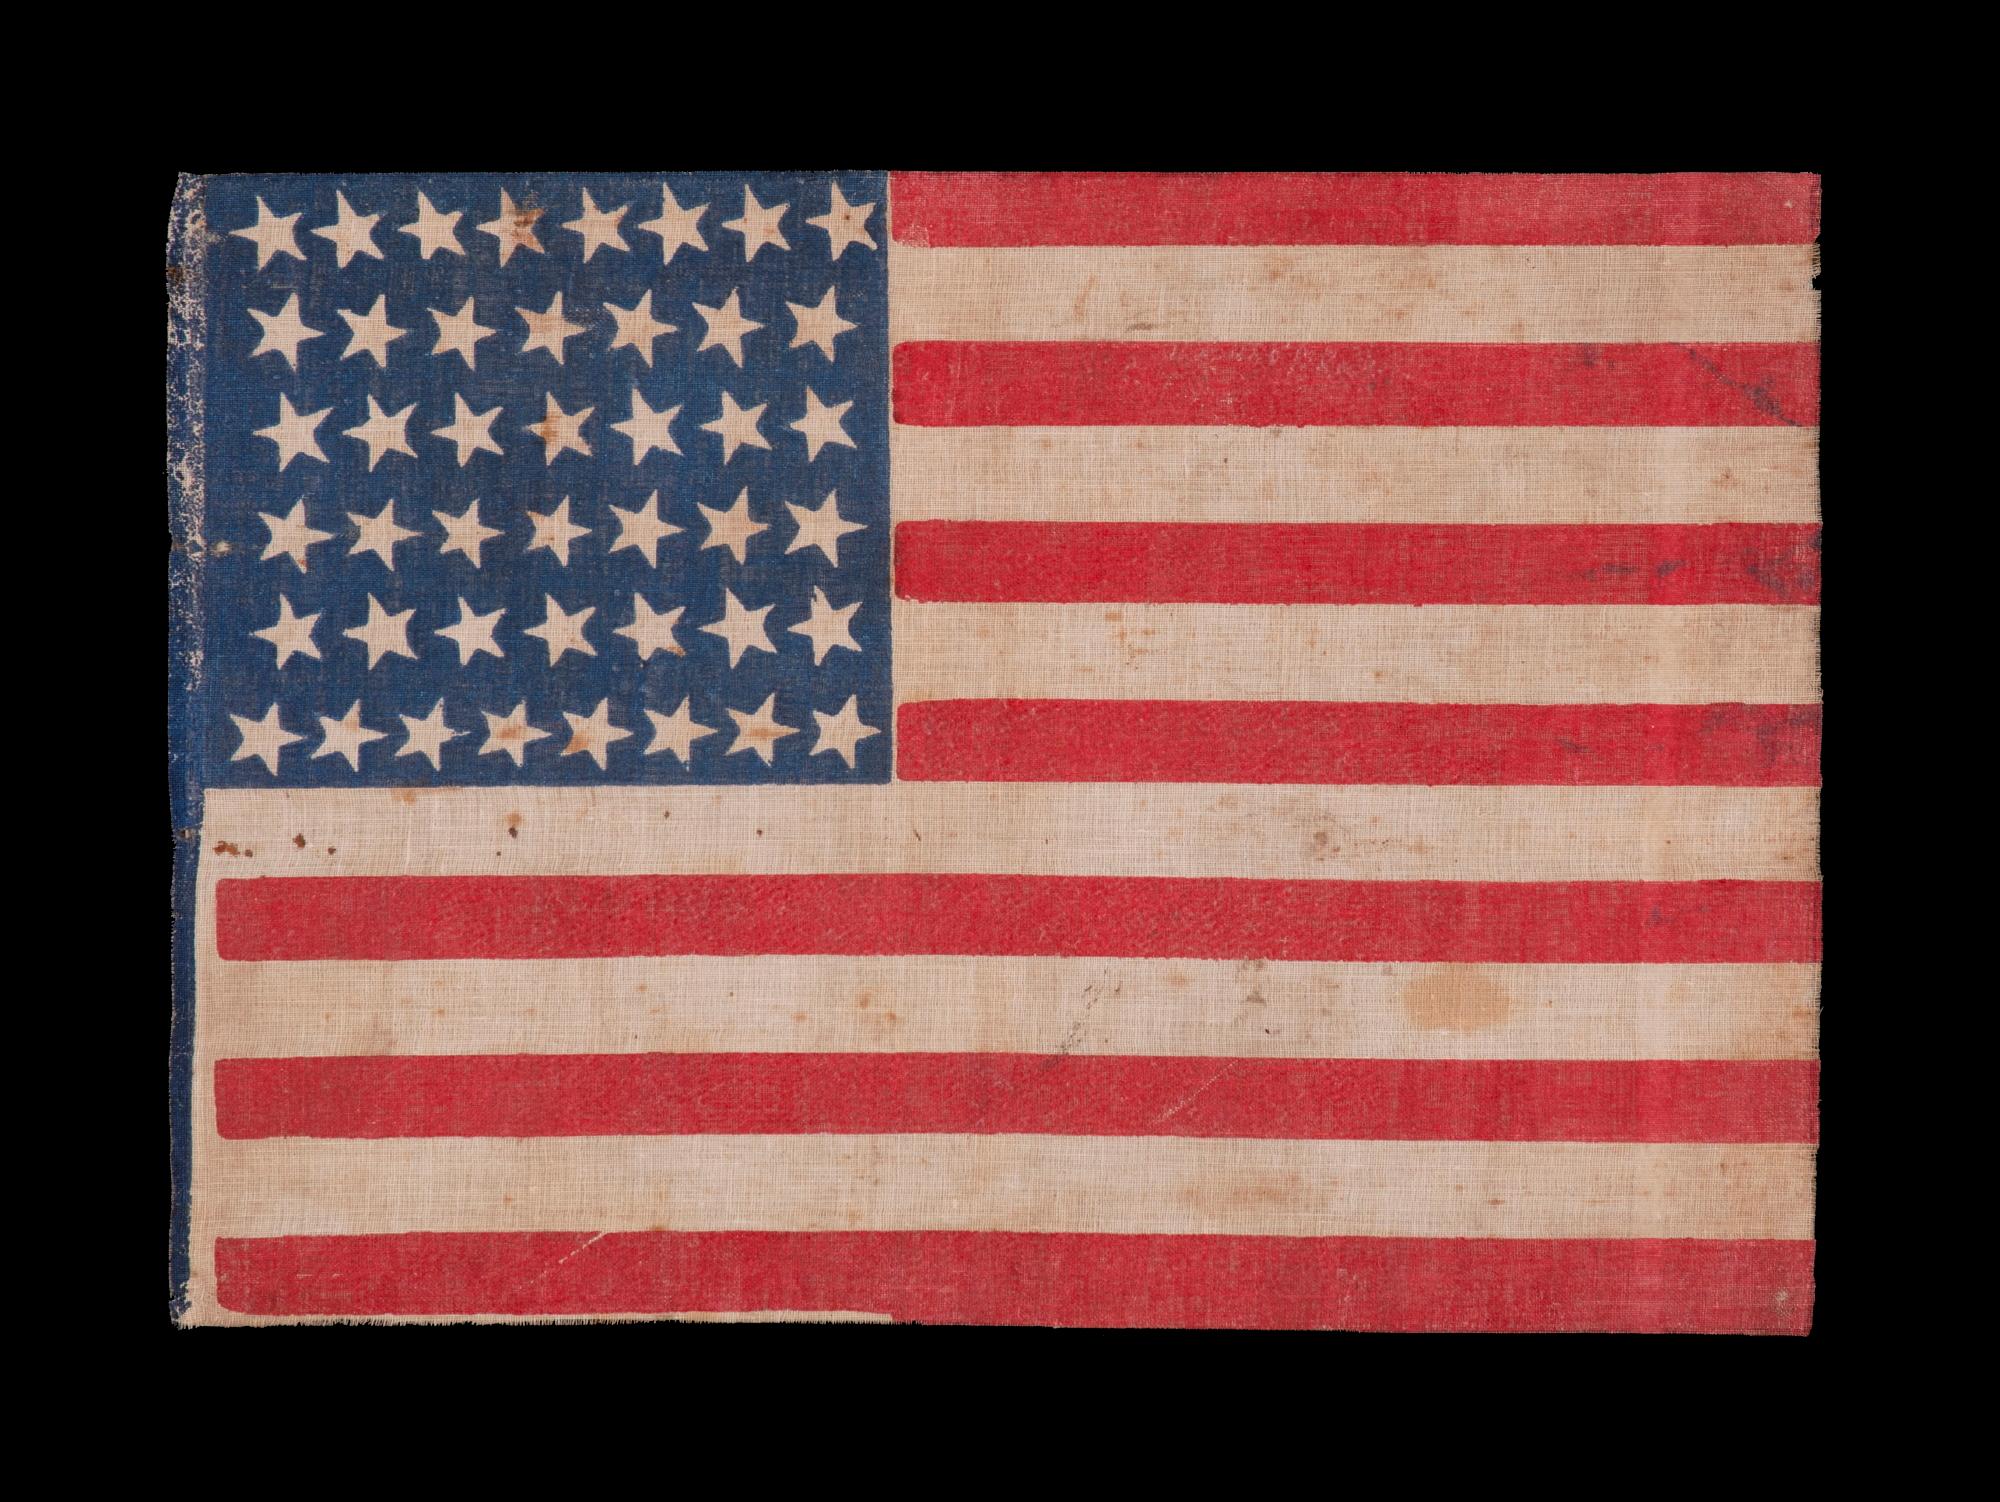 44 STAR ANTIQUE AMERICAN FLAG WITH AN HOURGLASS FORMATION ON A BRILLIANT BLUE CANTON; REFLECTS THE ERA WHEN WYOMING WAS THE MOST RECENT STATE TO JOIN THE UNION, 1890-1896

44 star American national parade flag, block-printed on coarse cotton. The